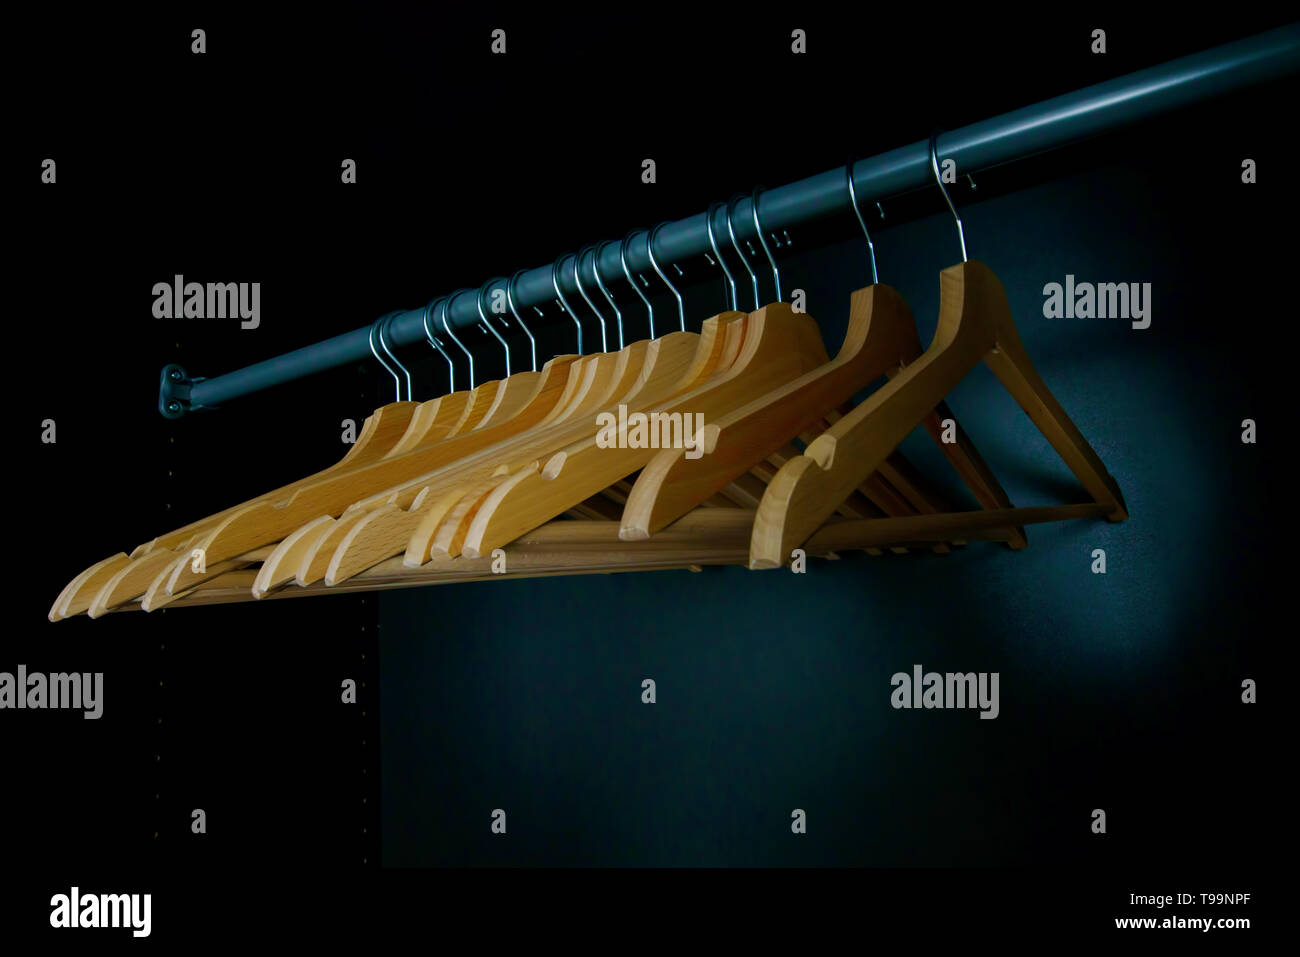 Empty wooden clothes hangers on a wardrobe rail, concept for expensive seasonal clothing desire and 'nothing to wear' or label-obsessed consumers Stock Photo